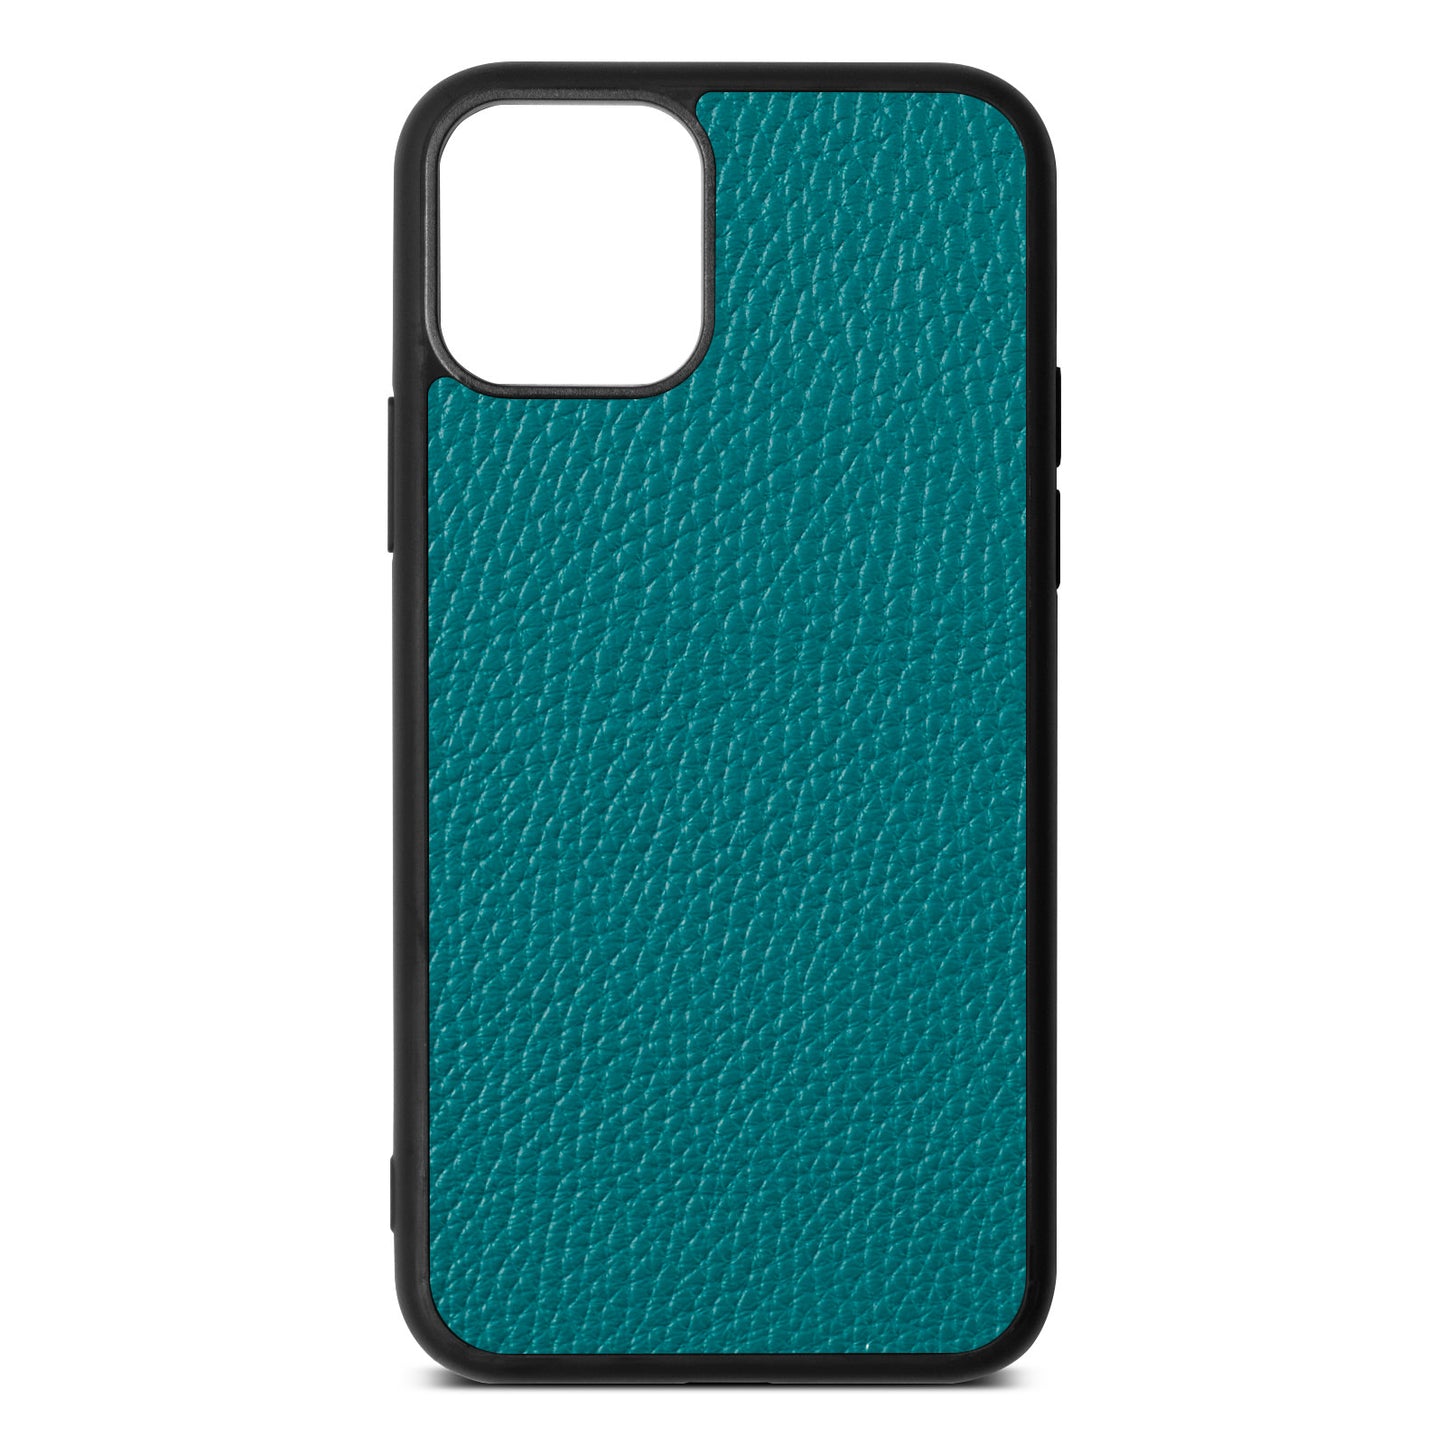 Blank iPhone 11 Pro Pebble Green Leather iPhone Case